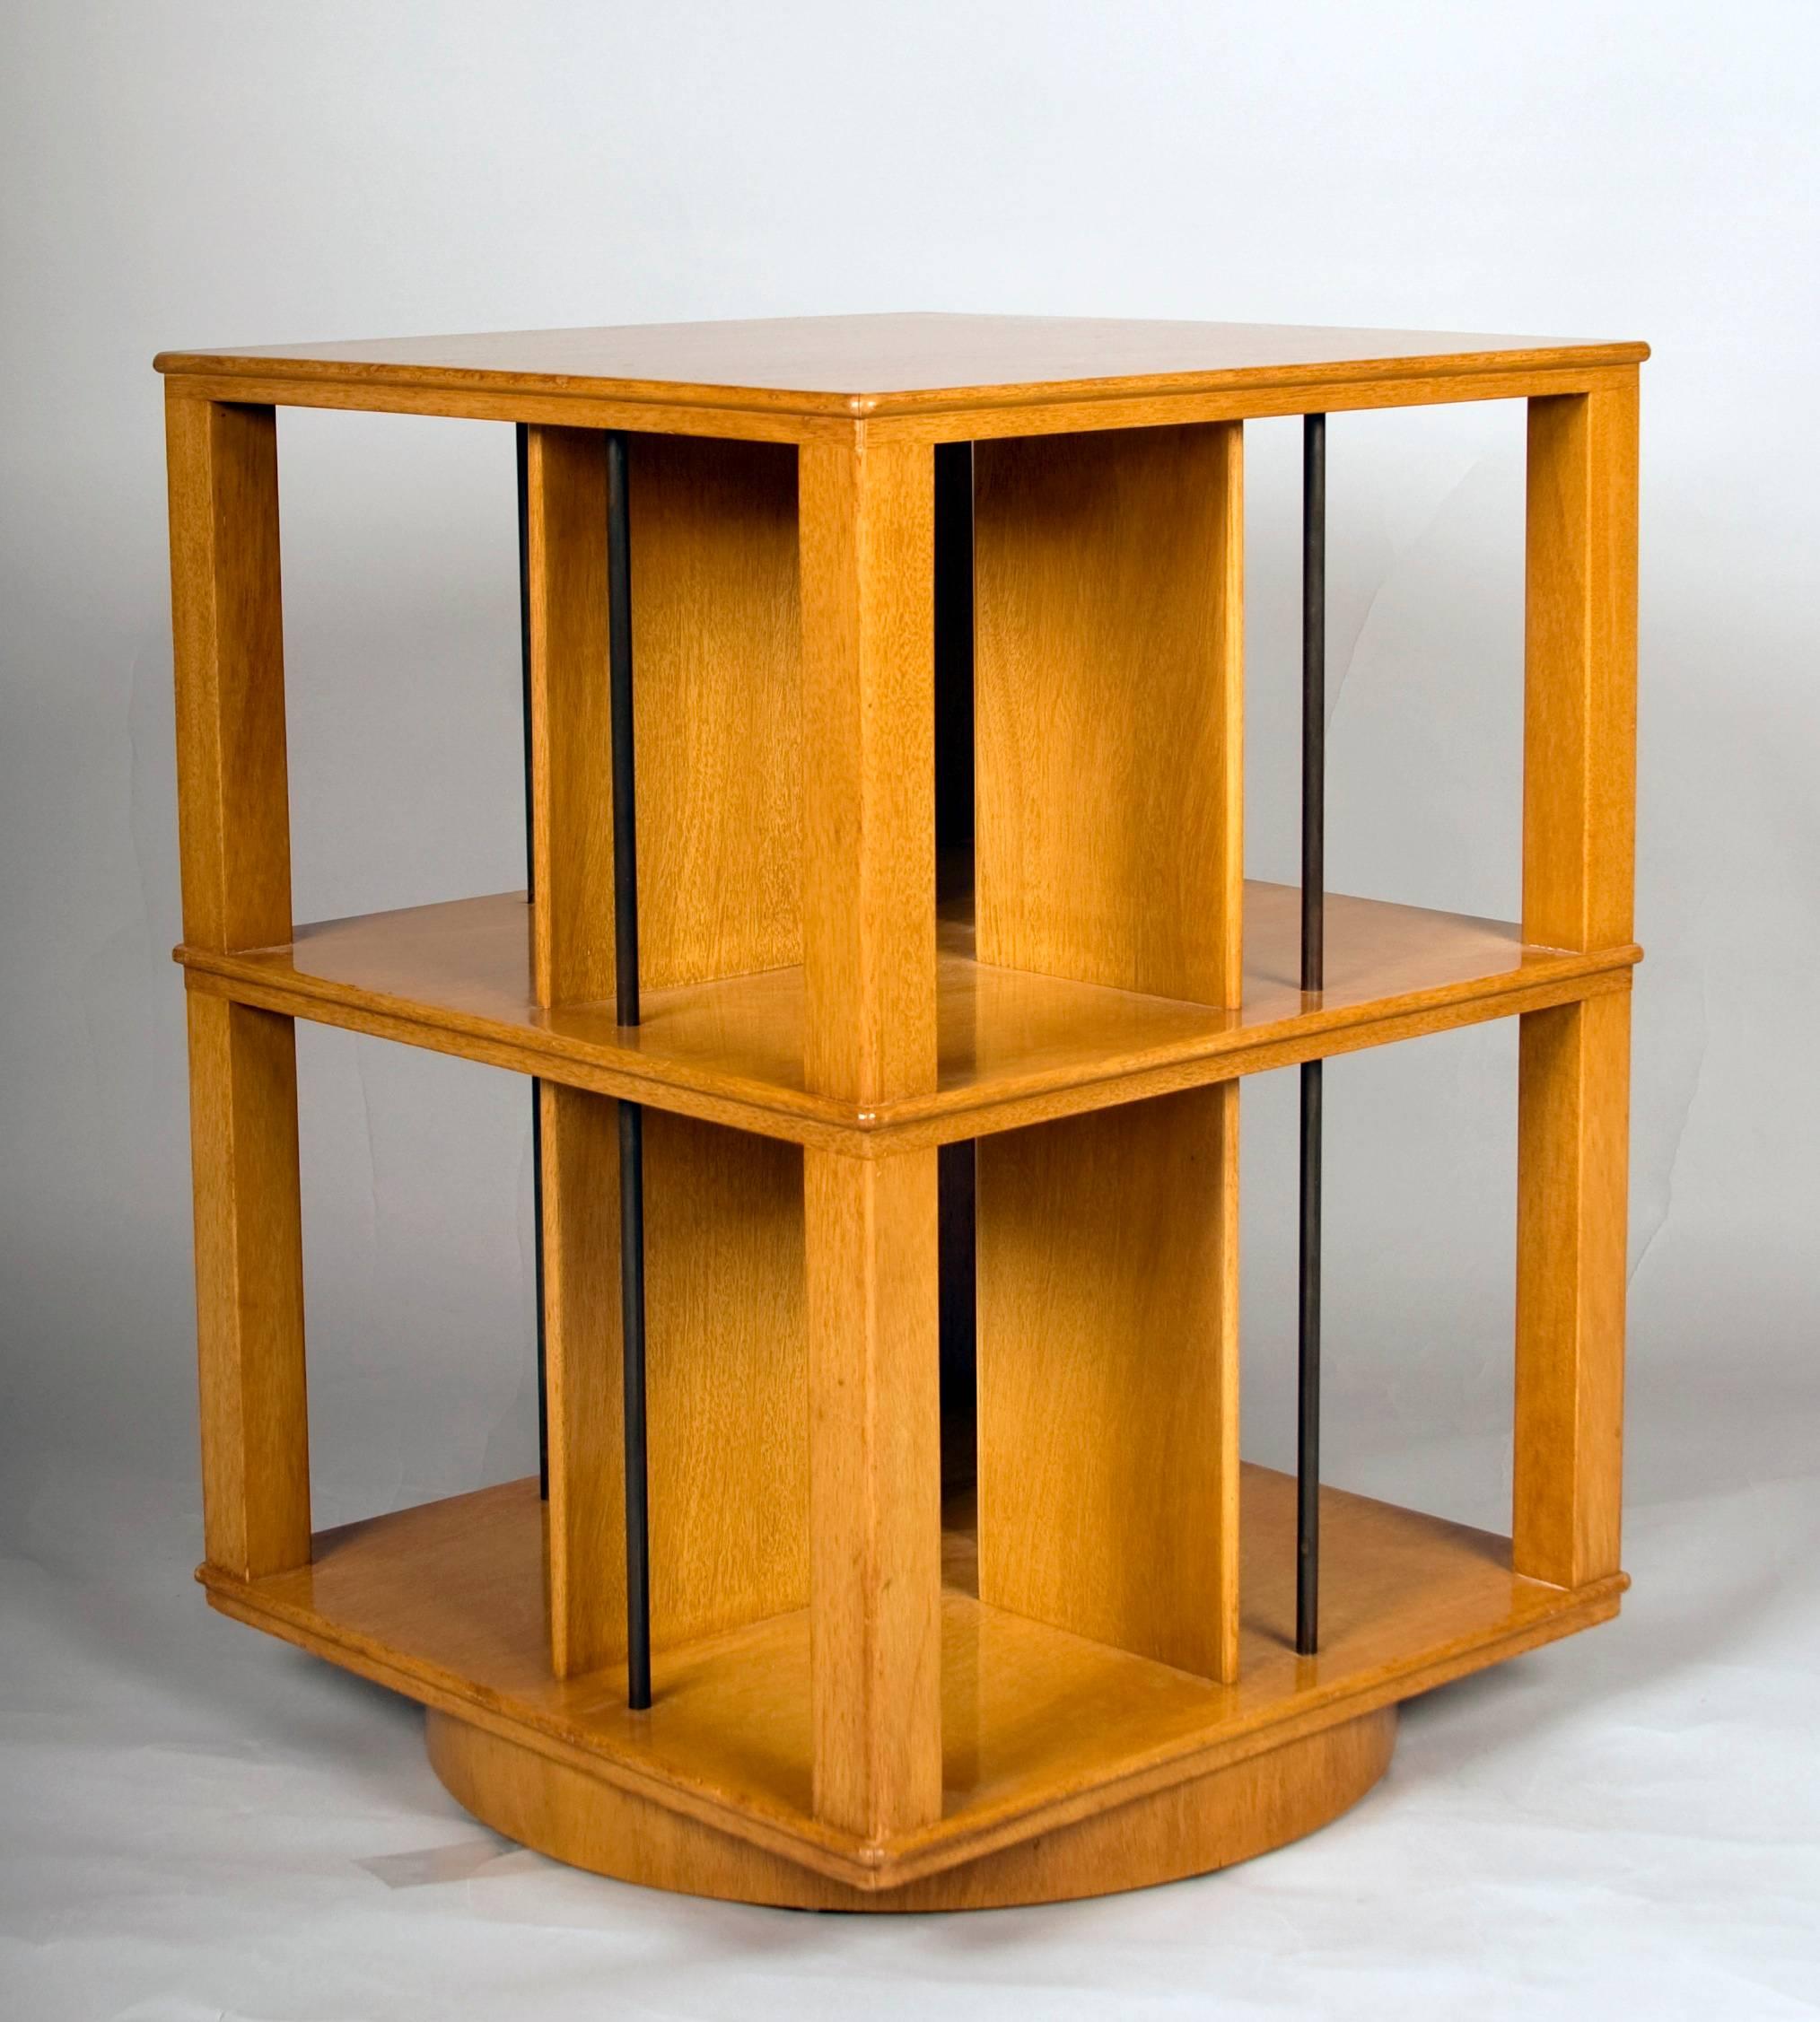 Early Edward Wormley revolving bookcase or table for Dunbar with dividers
and vertical patinated brass rods over a round revolving platform base.
Bookcase retains original 